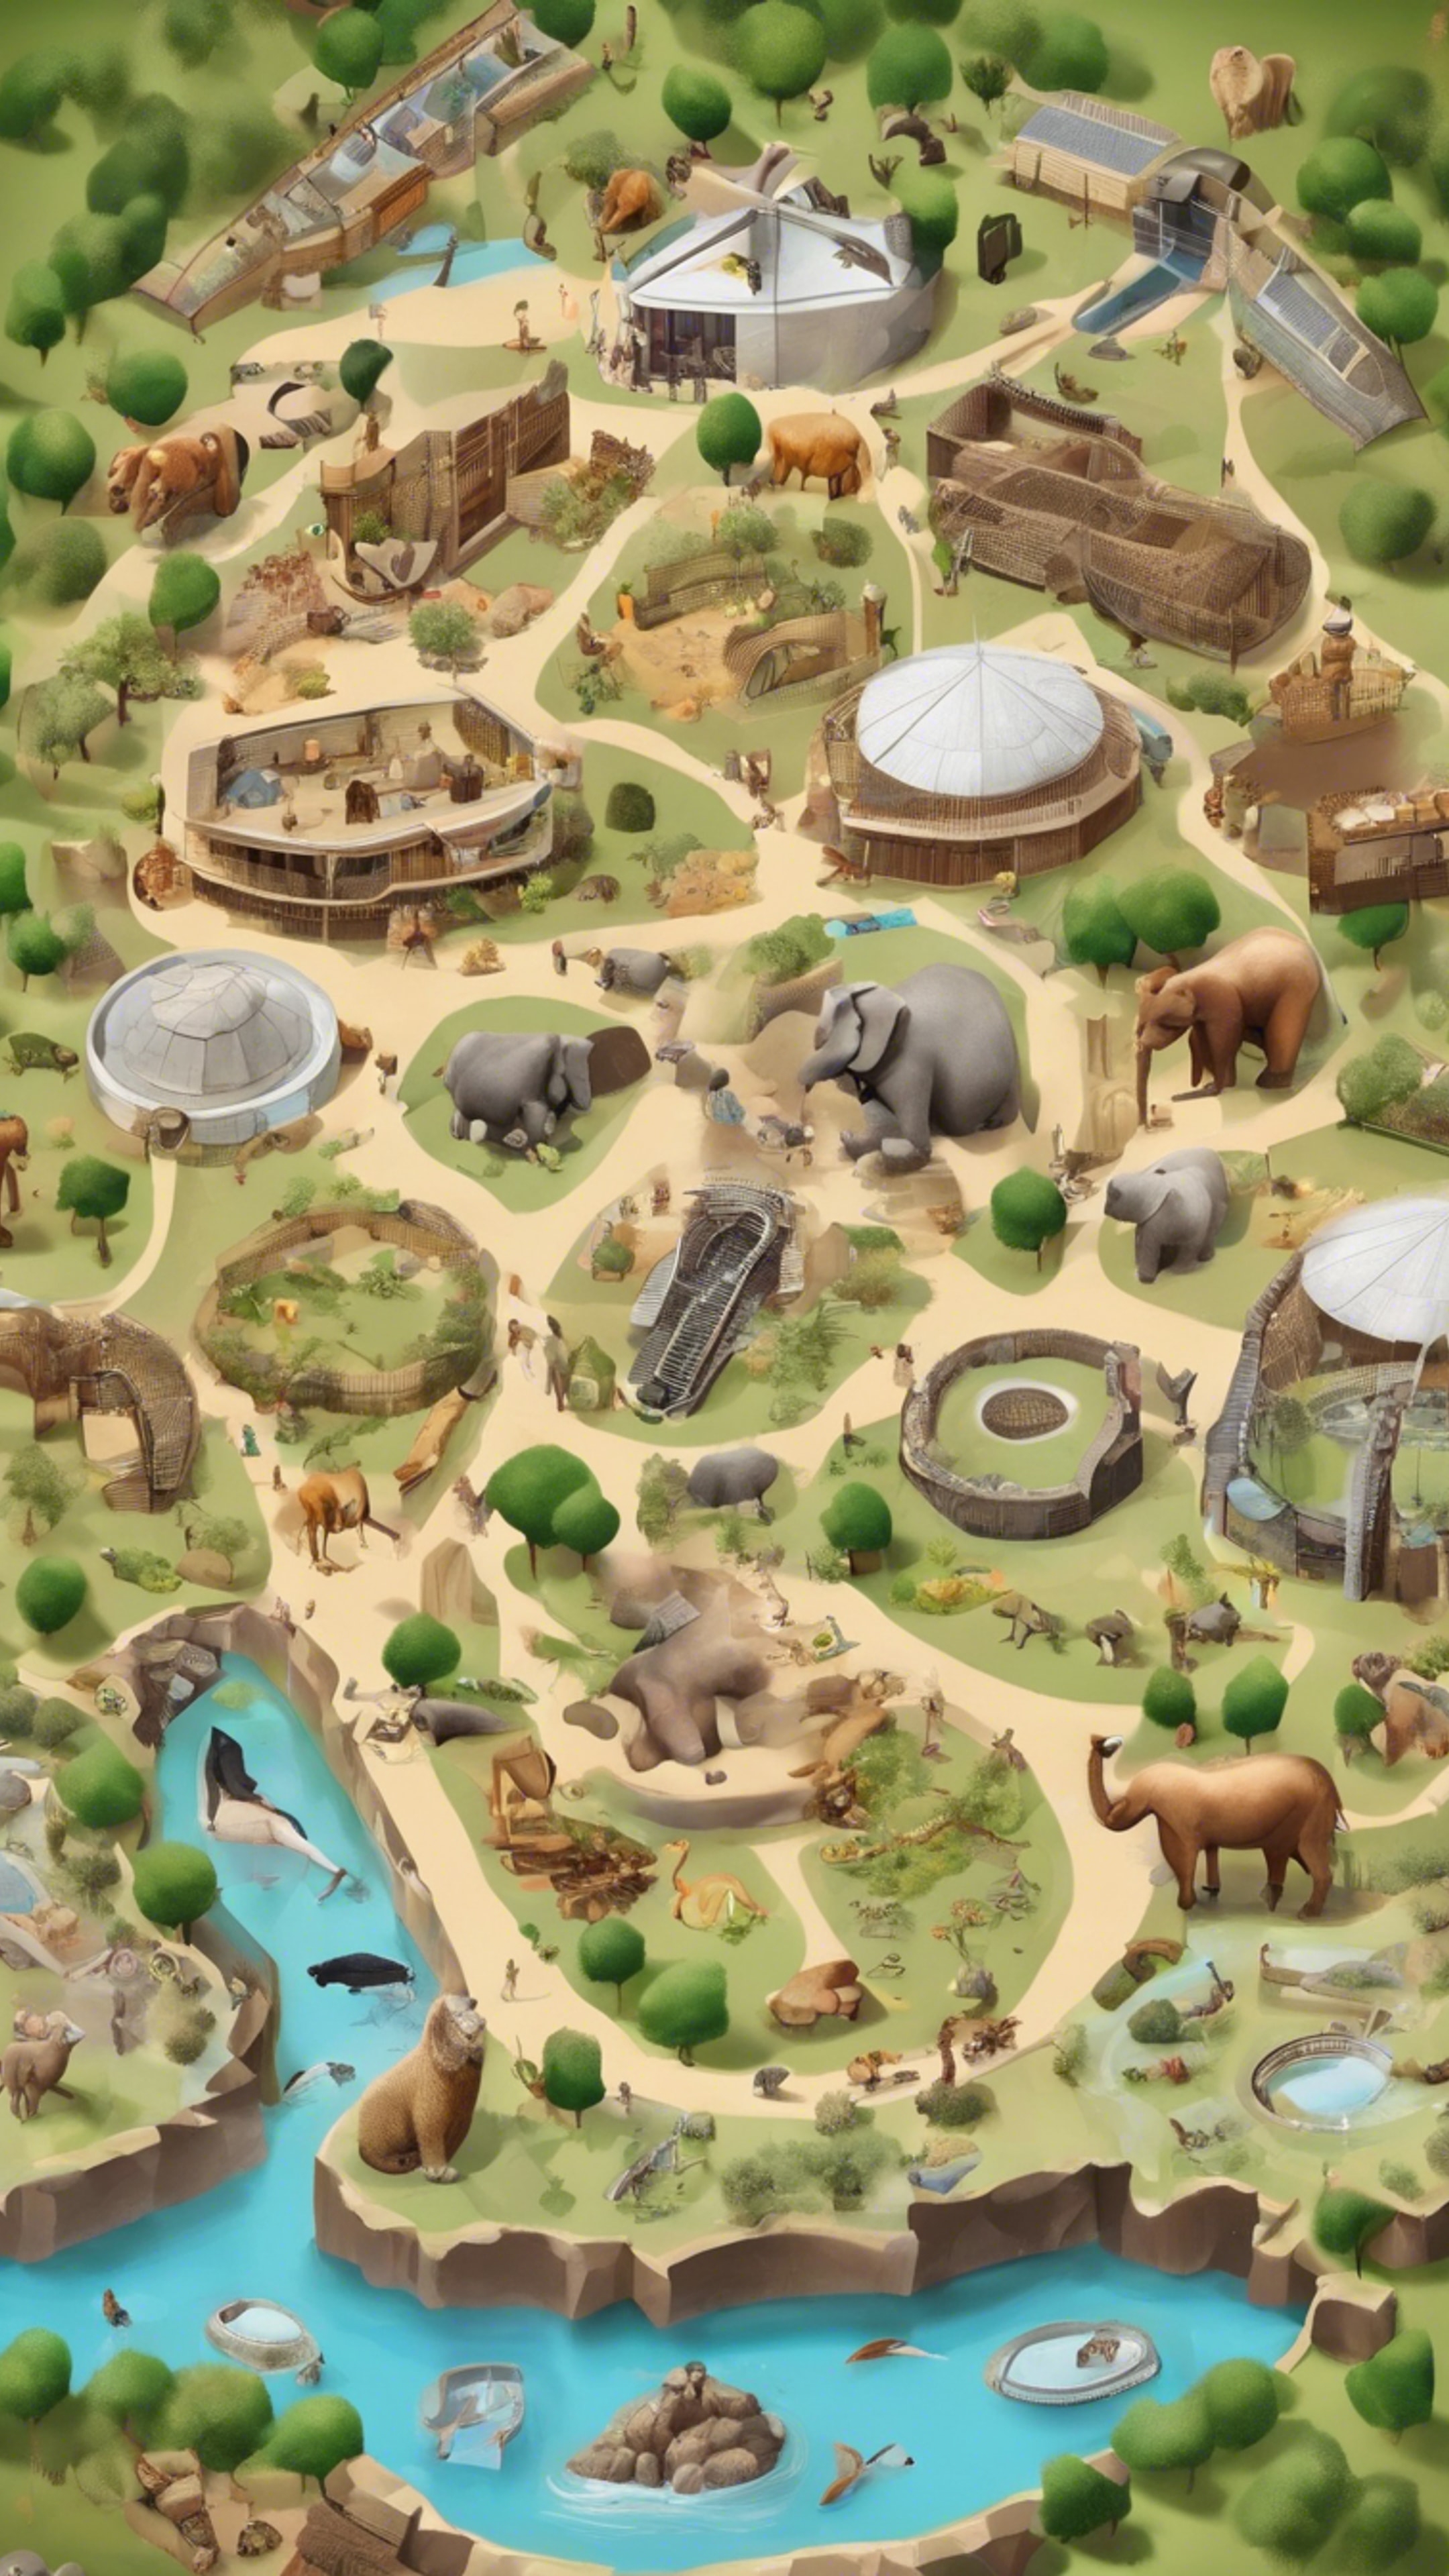 A graphic map of a zoo, with different animal enclosures, food stalls and amenities. duvar kağıdı[7d3ed7eed3f244f7a17f]